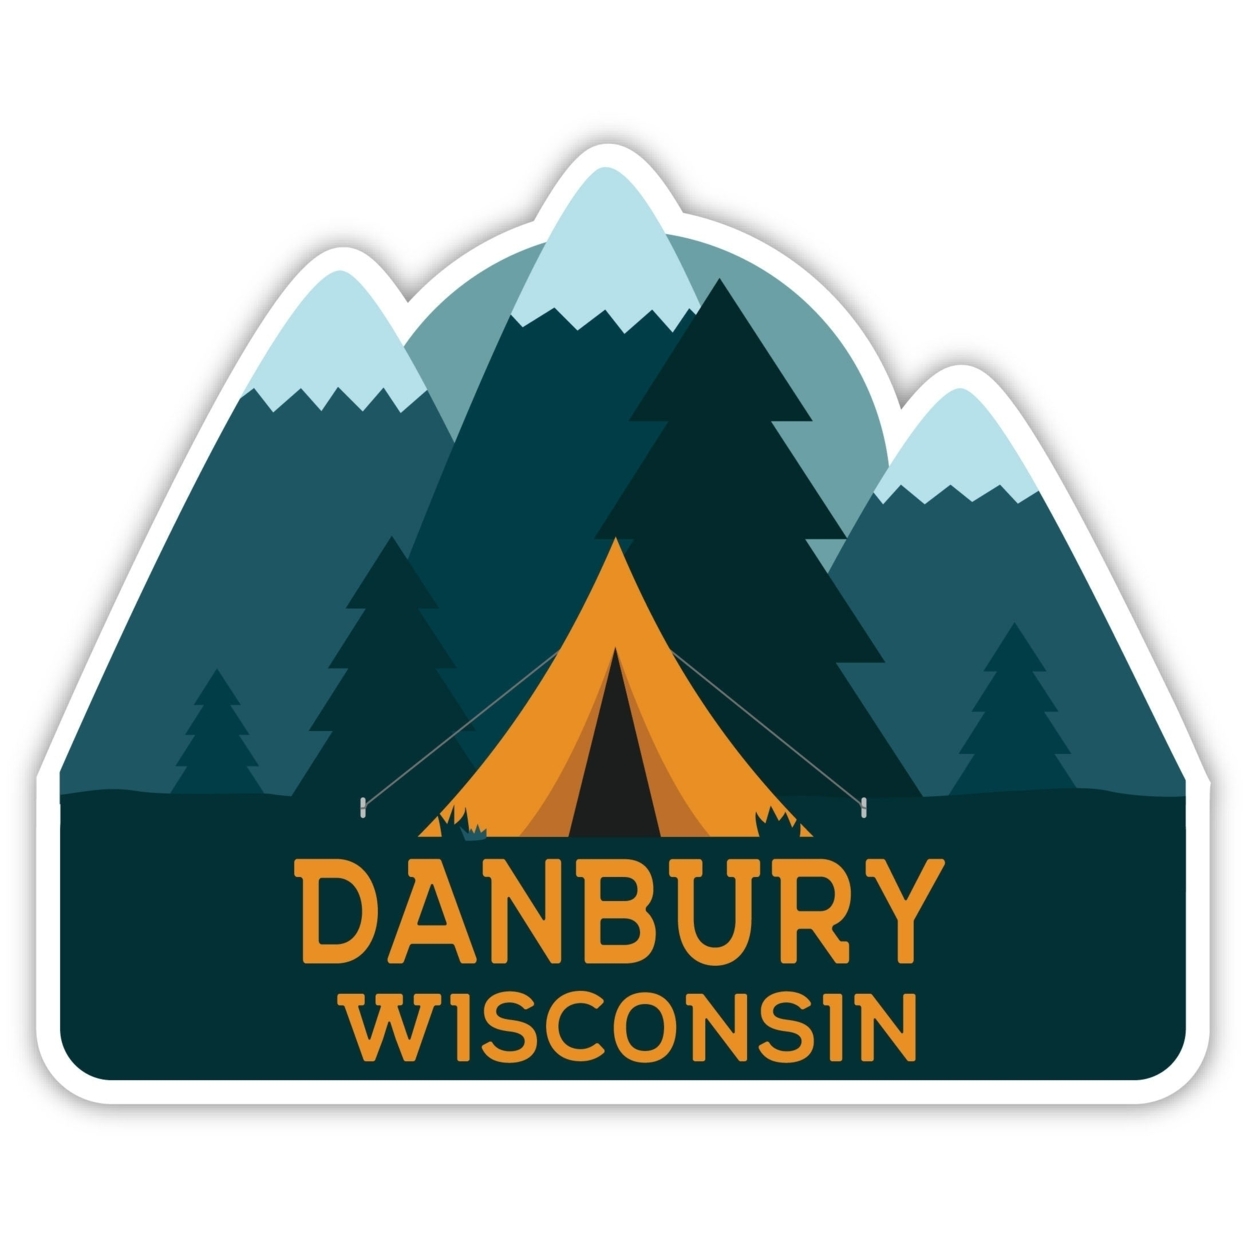 Danbury Wisconsin Souvenir Decorative Stickers (Choose Theme And Size) - 4-Pack, 2-Inch, Tent